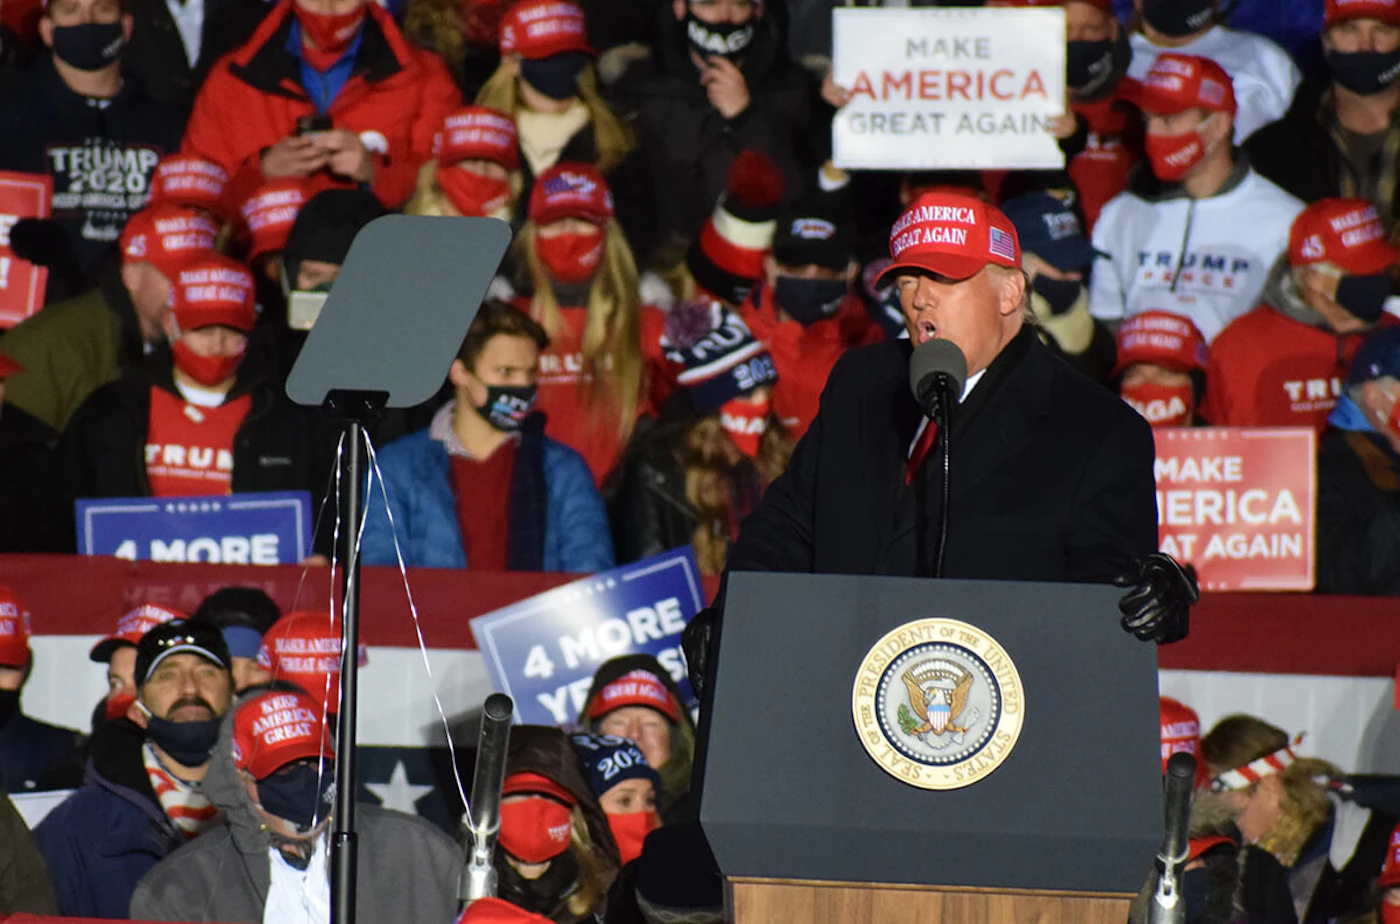 President Donald Trump speaks in Kenosha Nov. 2, less than 12 hours before polls were set to open in Wisconsin for the presidential election. He lost his bid for re-election, yet two lawsuits have been filed, challenging Wisconsin's election results. (Photo by Jonathon Sadowski)